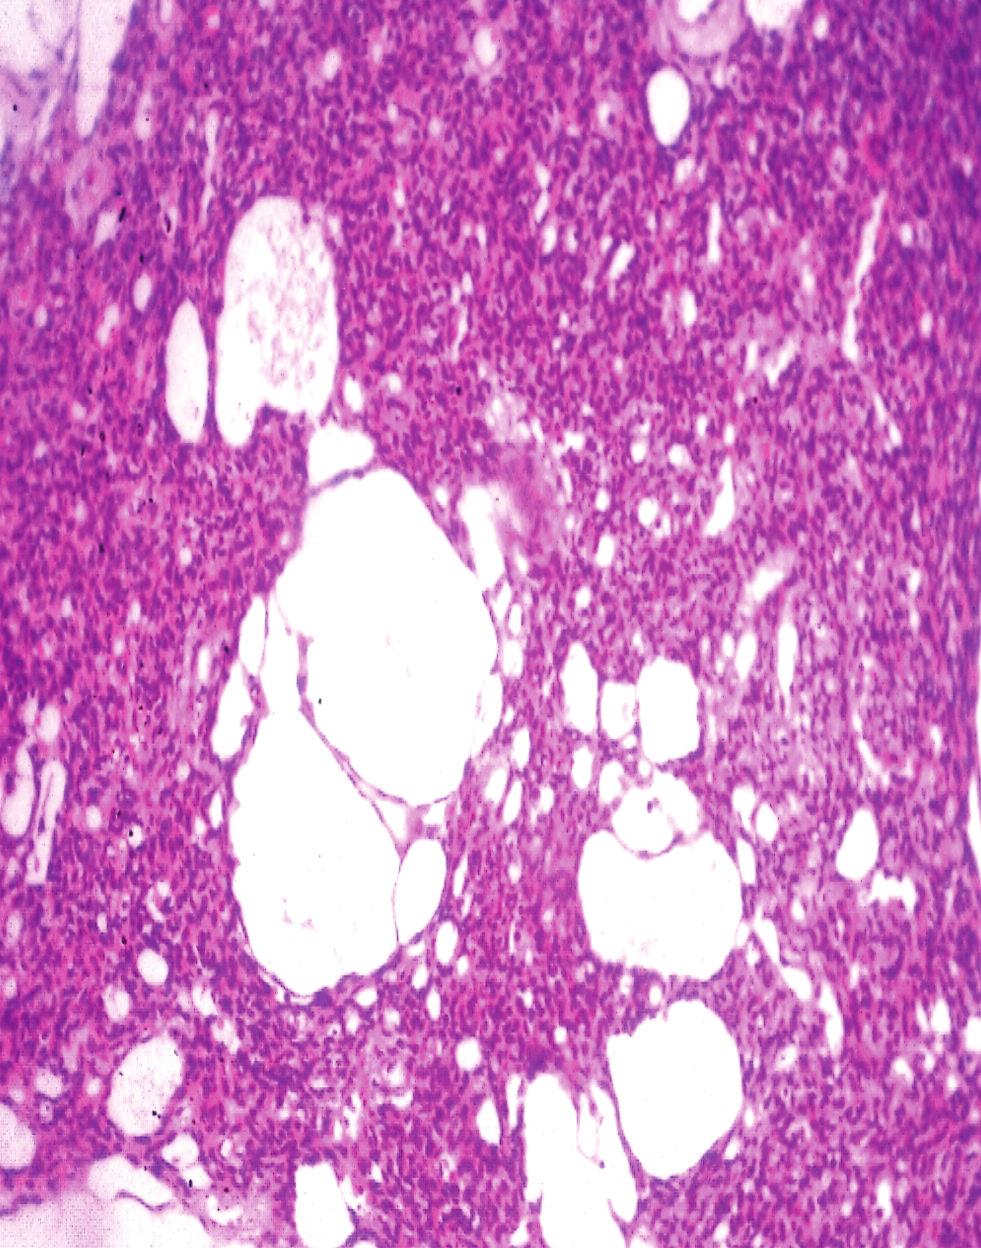 Since these tumors were morphologically indistinguishable from thyroid carcinomas that arise in the FAP, currently the term C-MV has been approved to describe tumors that occur in both